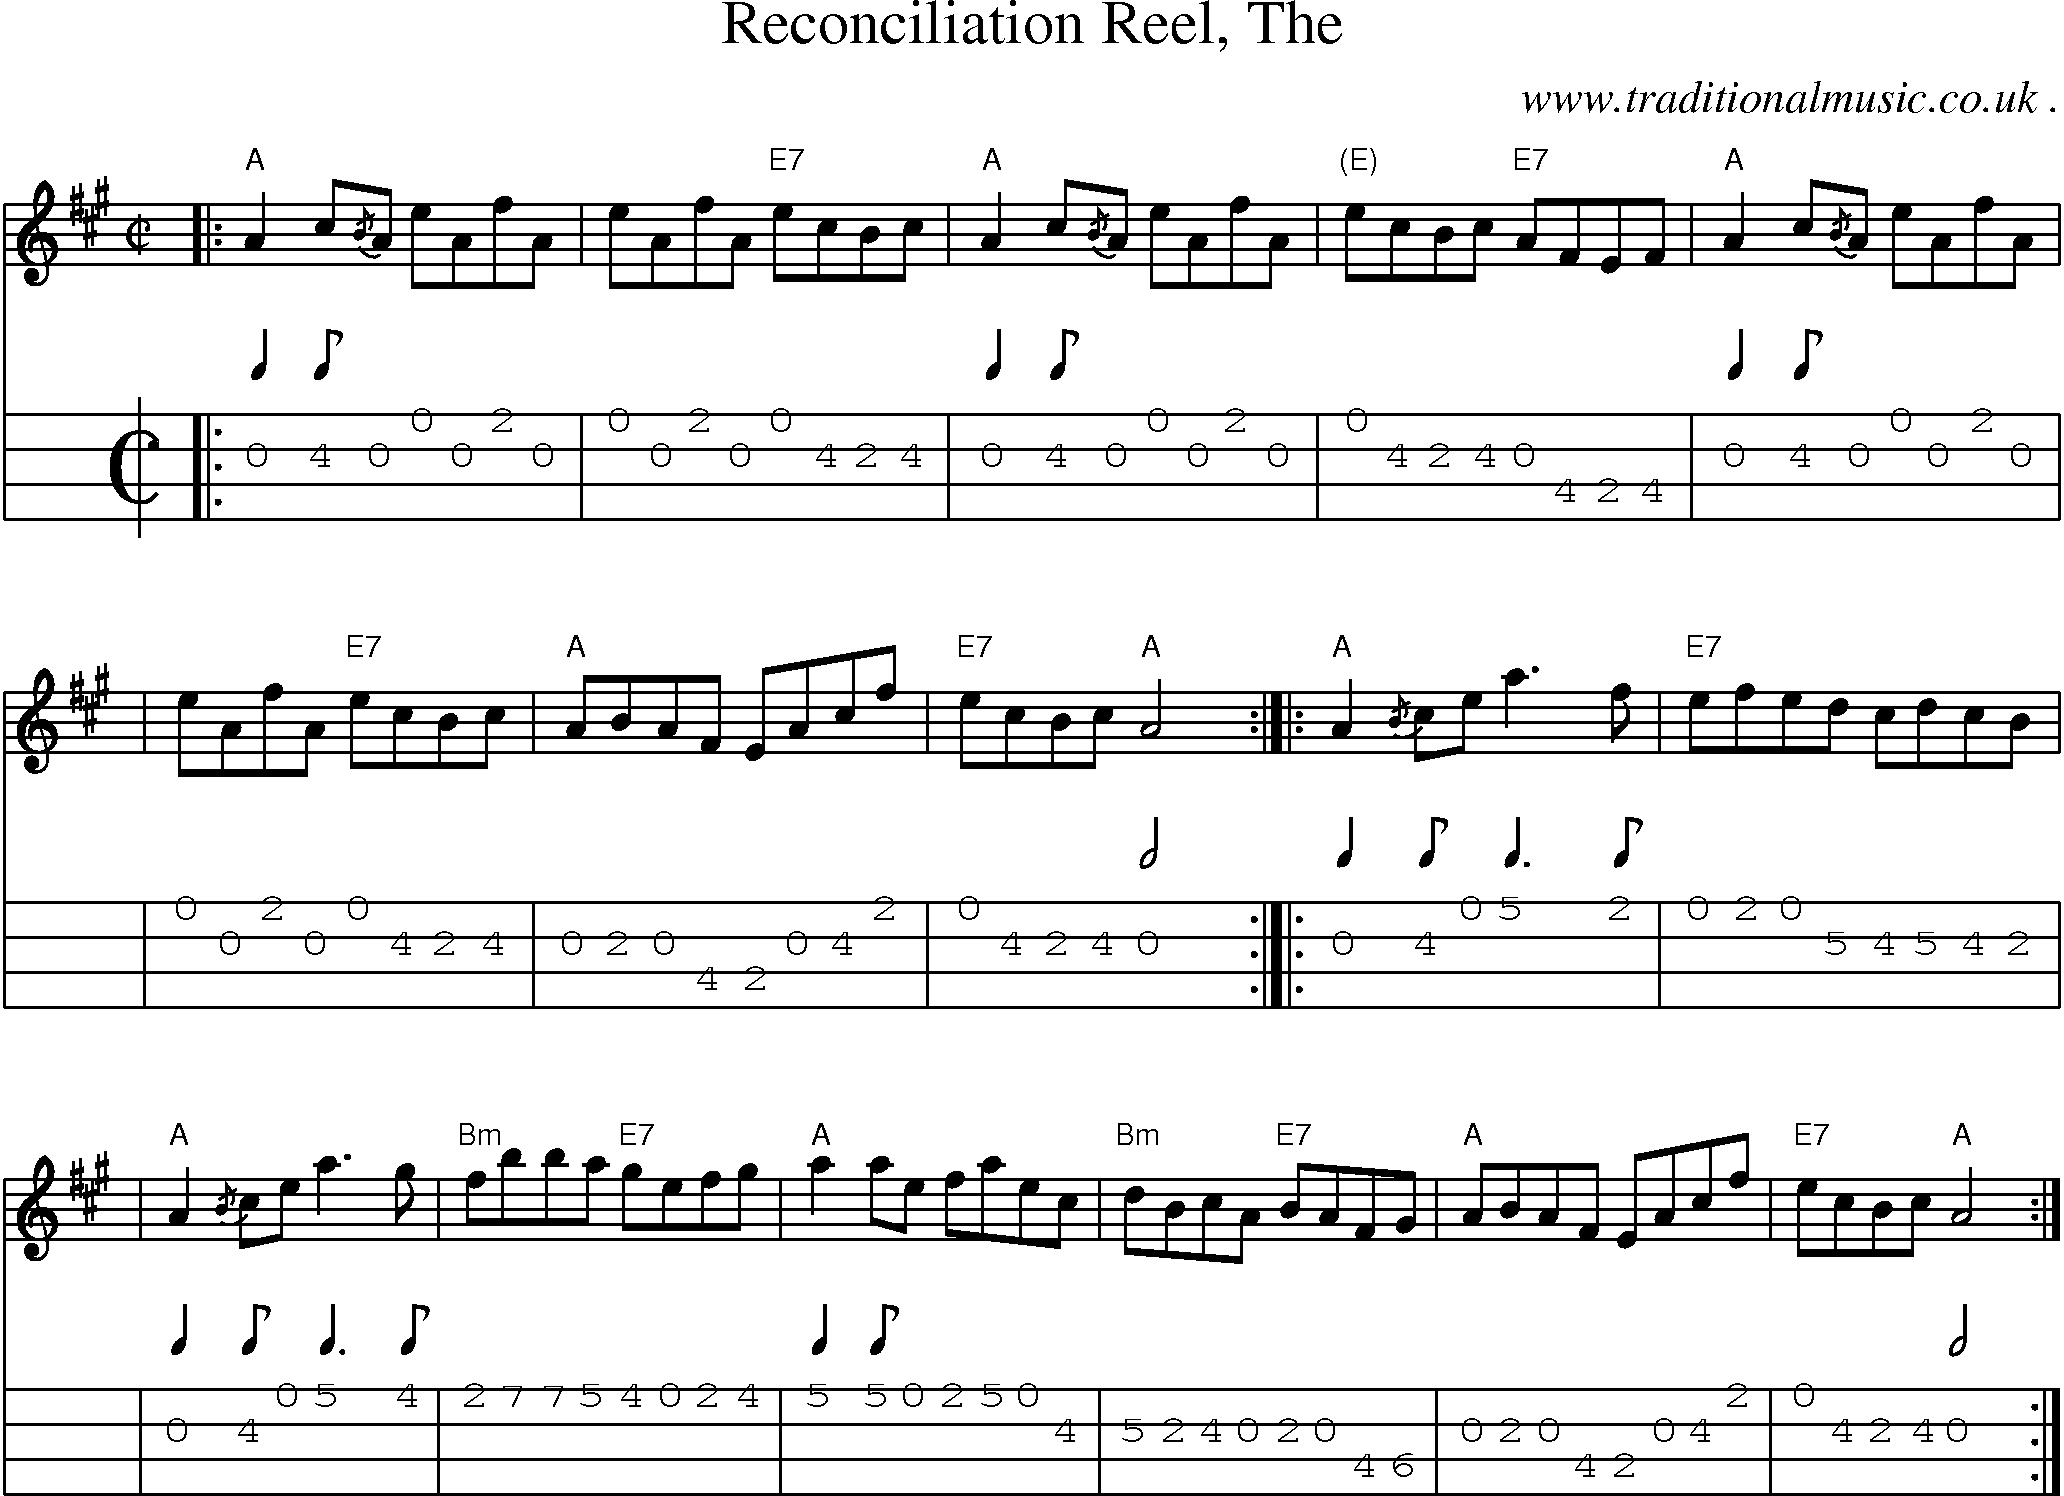 Sheet-music  score, Chords and Mandolin Tabs for Reconciliation Reel The